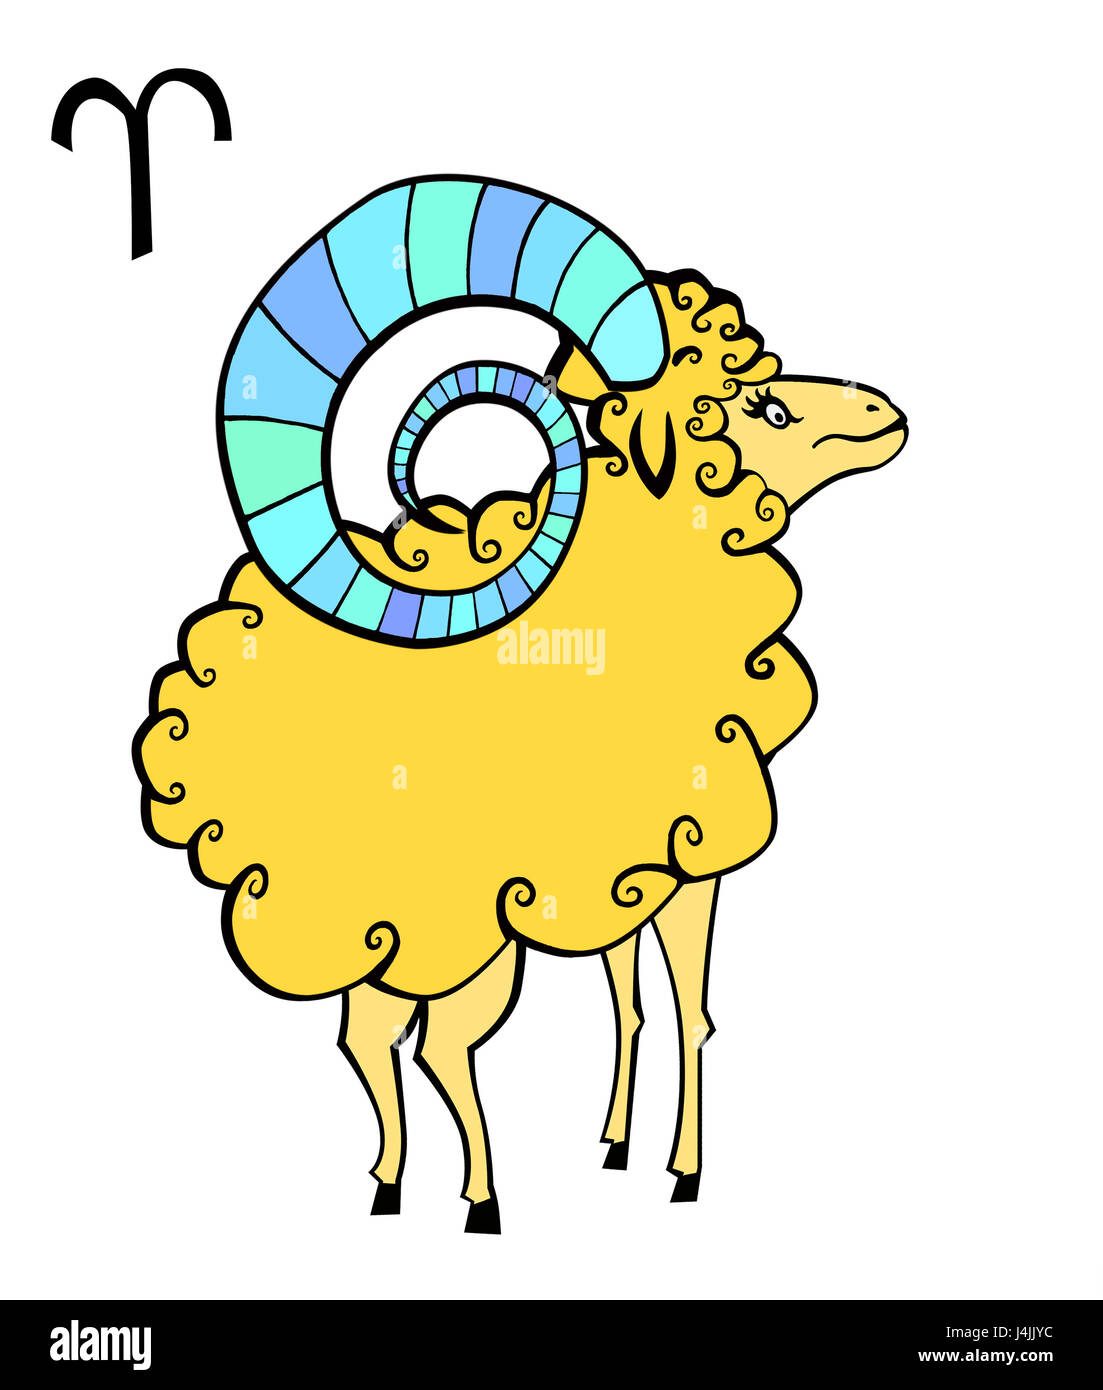 Illustration, Stern's character, Aries sign of the zodiac, ecliptic sign of the zodiac, astrology, animal character, esotericism, faith, sign of the zodiac, horoscope Stock Photo